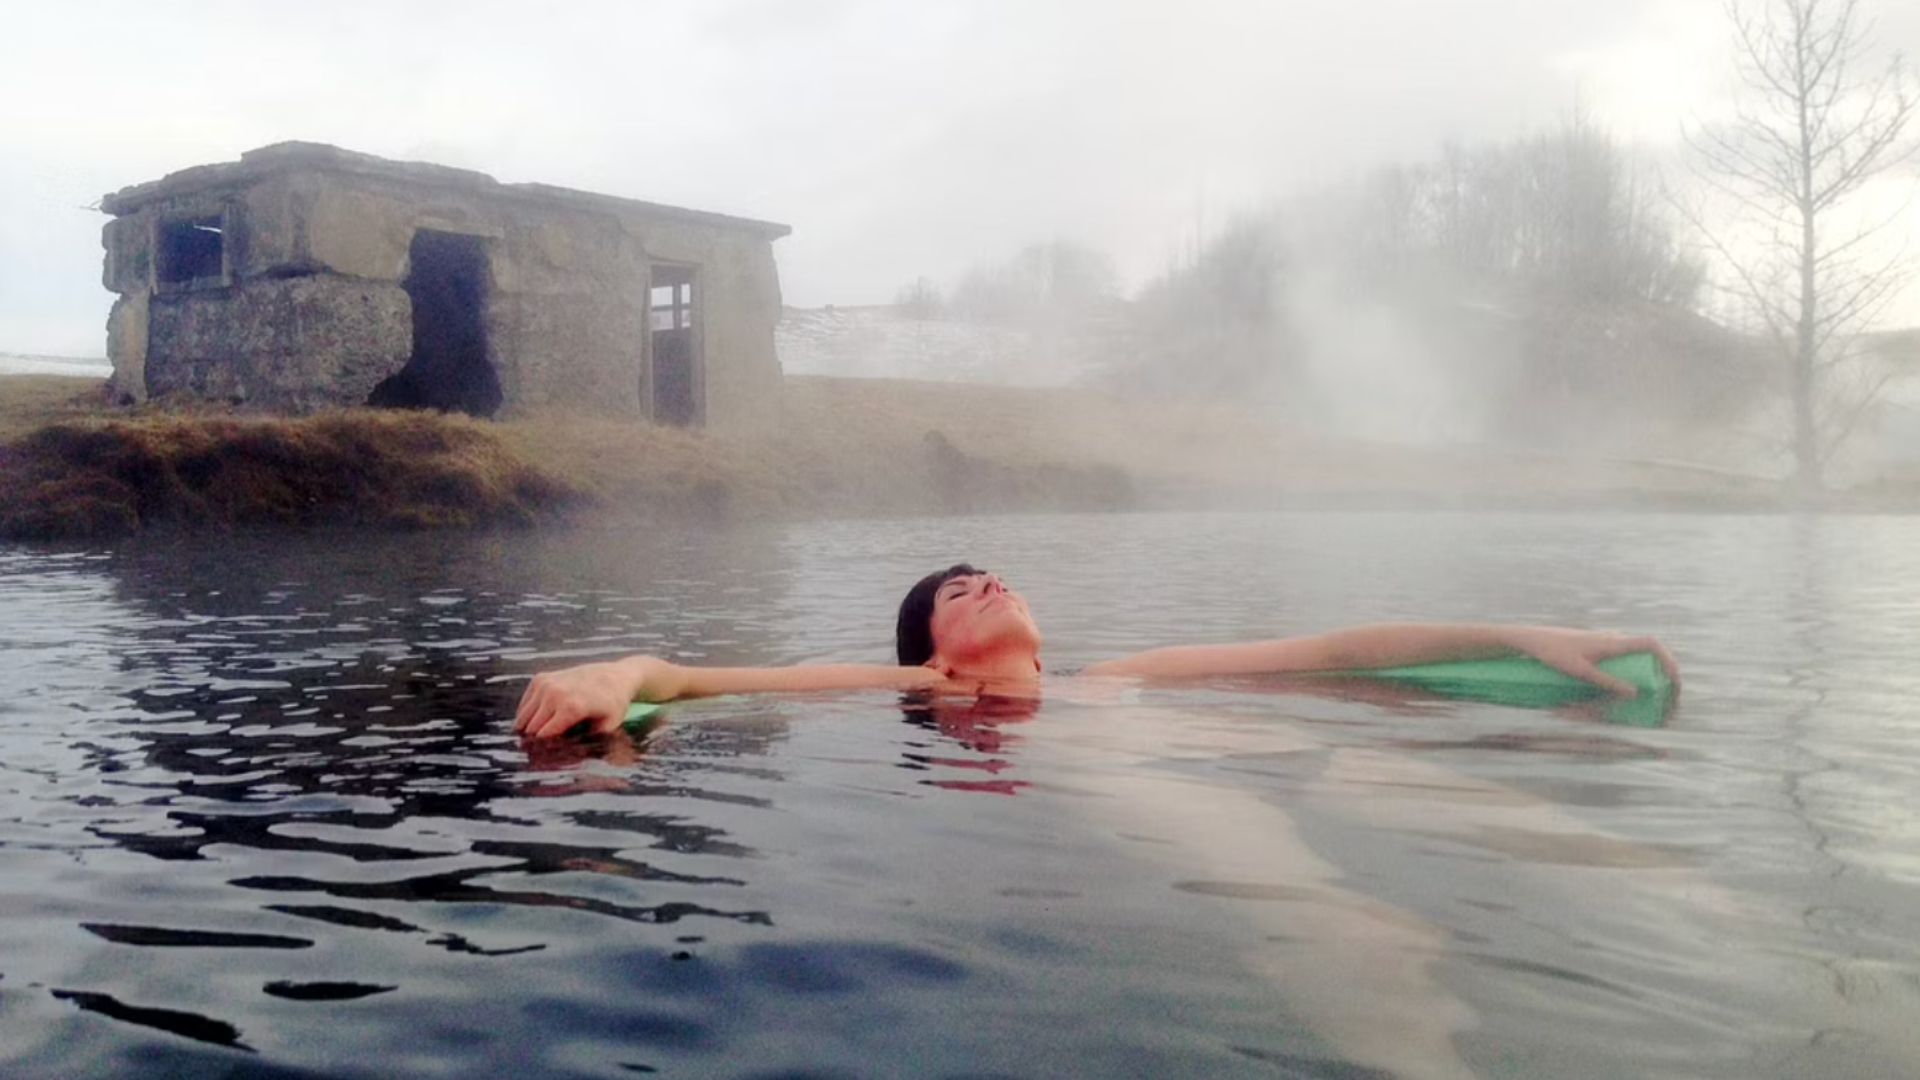 A tourist resting it the Secret Lagoon, geothermal pool in Iceland